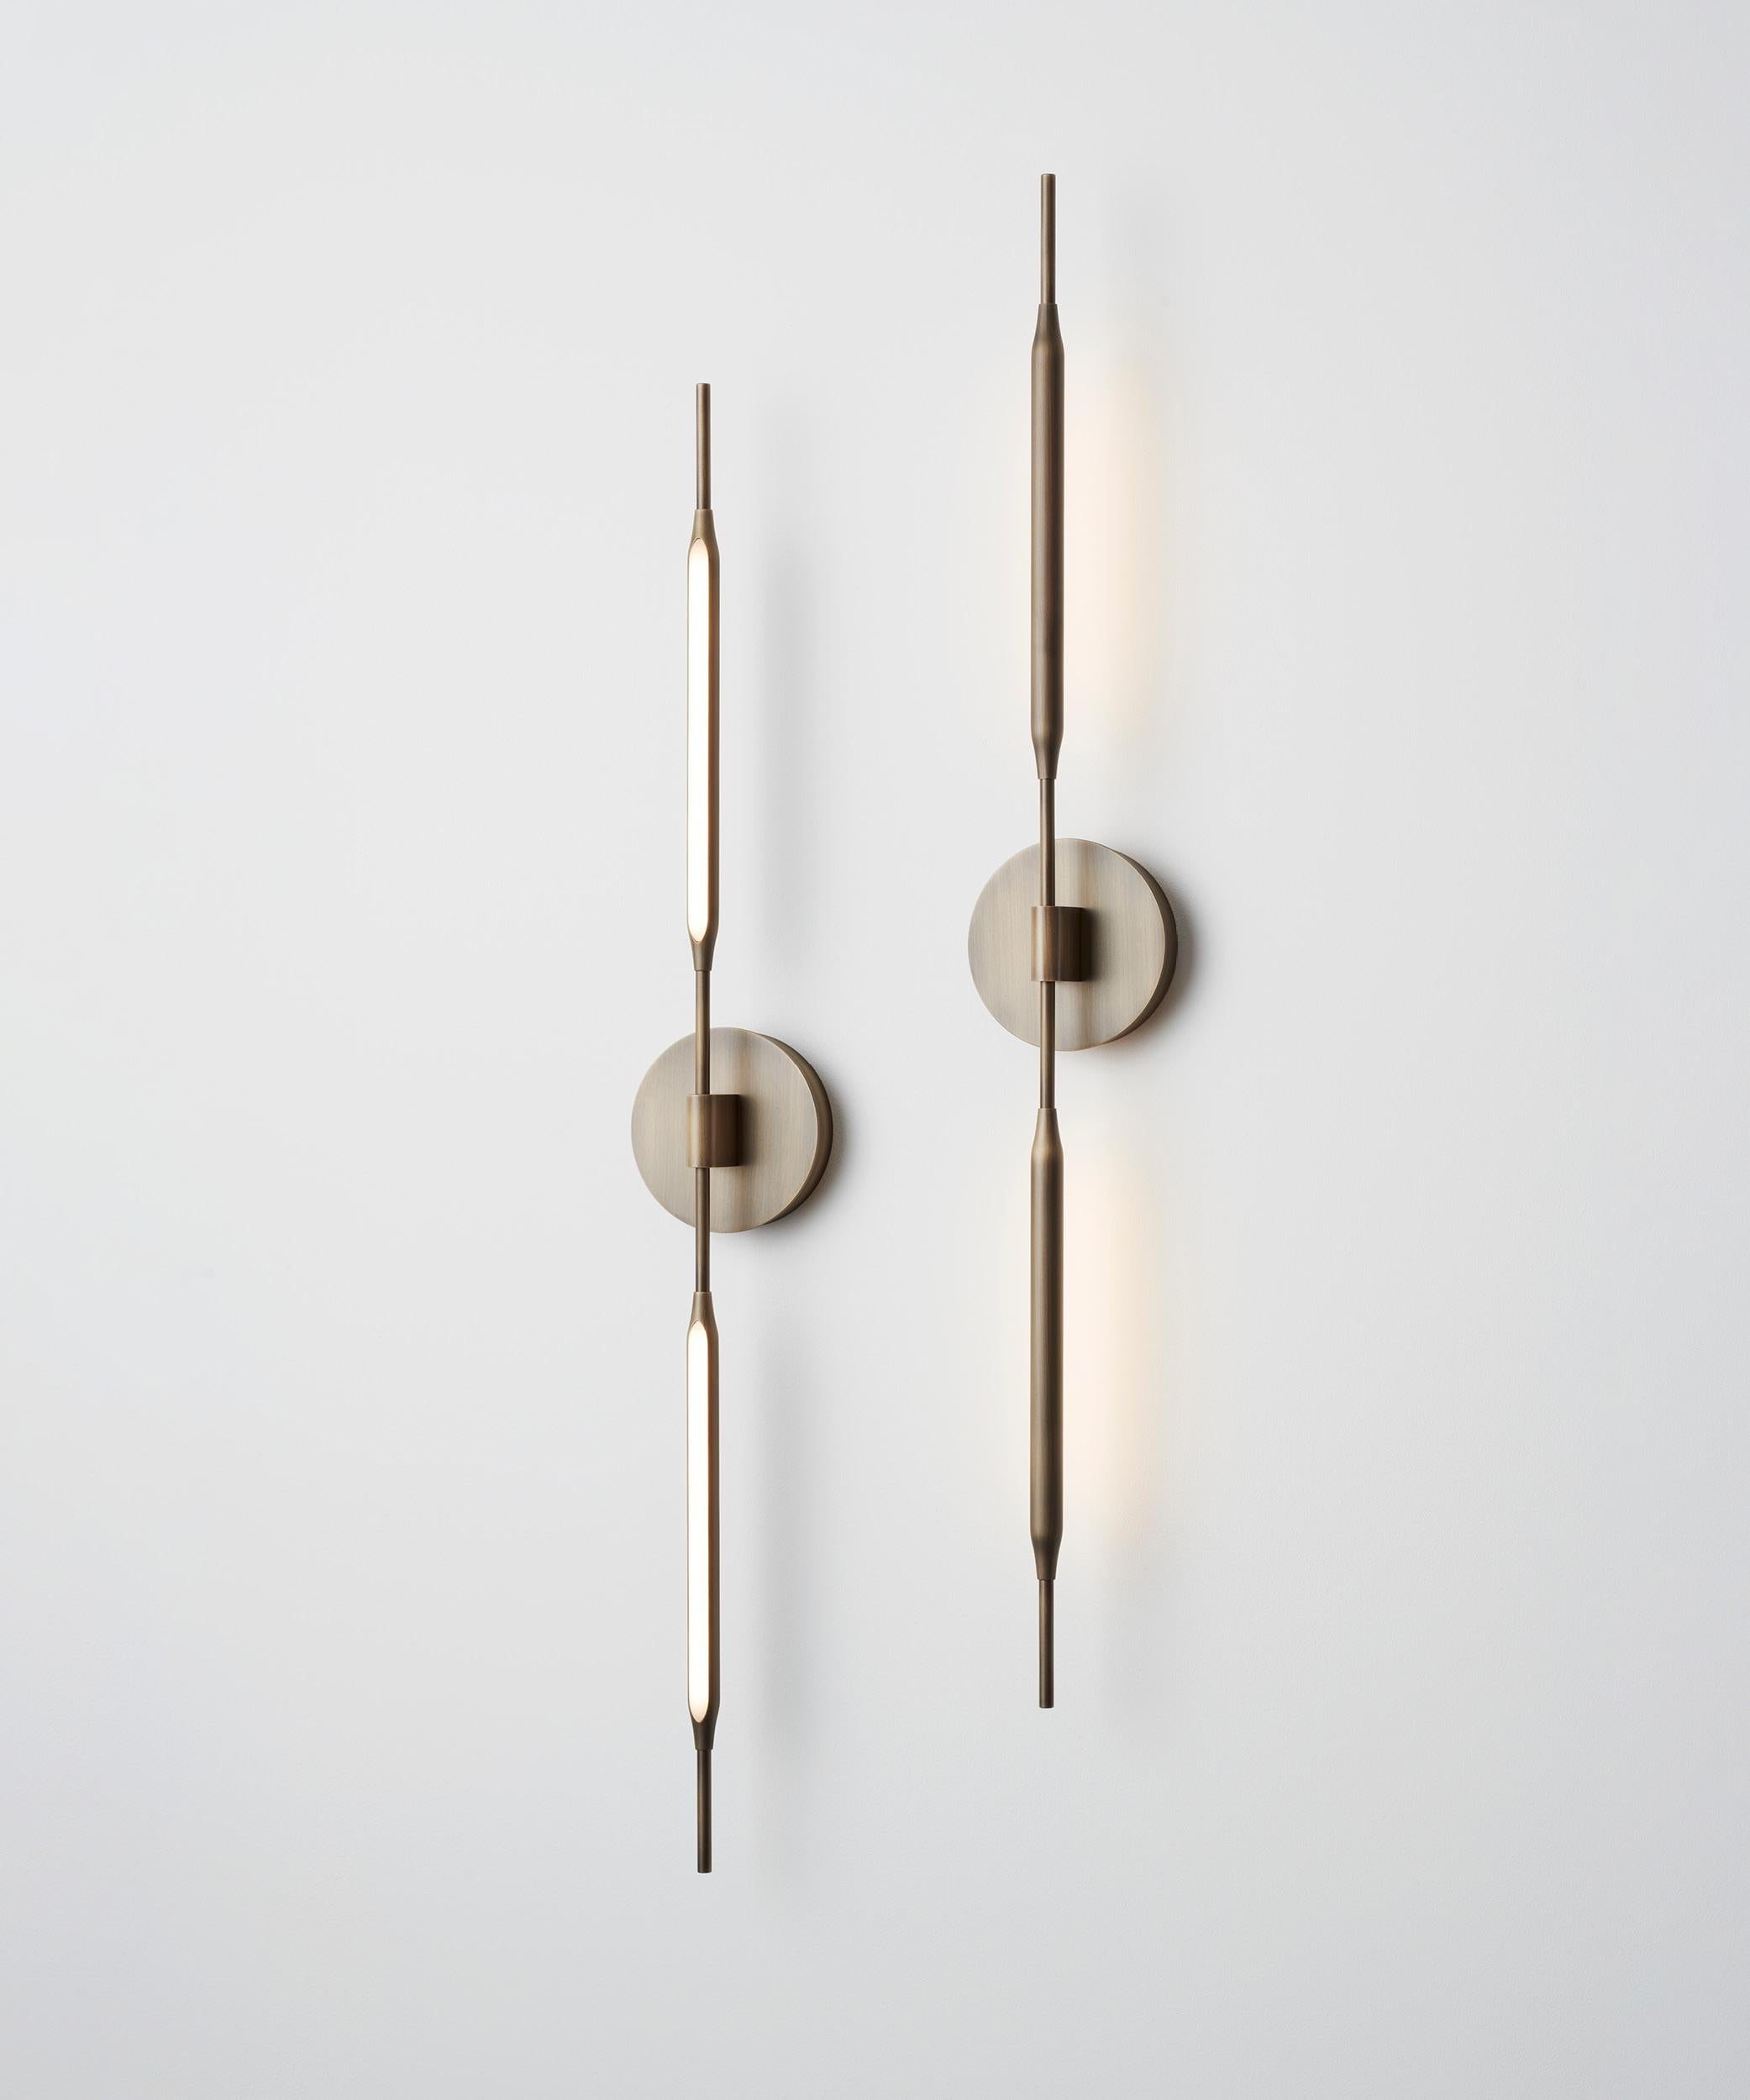 British Reed Wall Light in Polished Nickel Finish, UL Listed For Sale